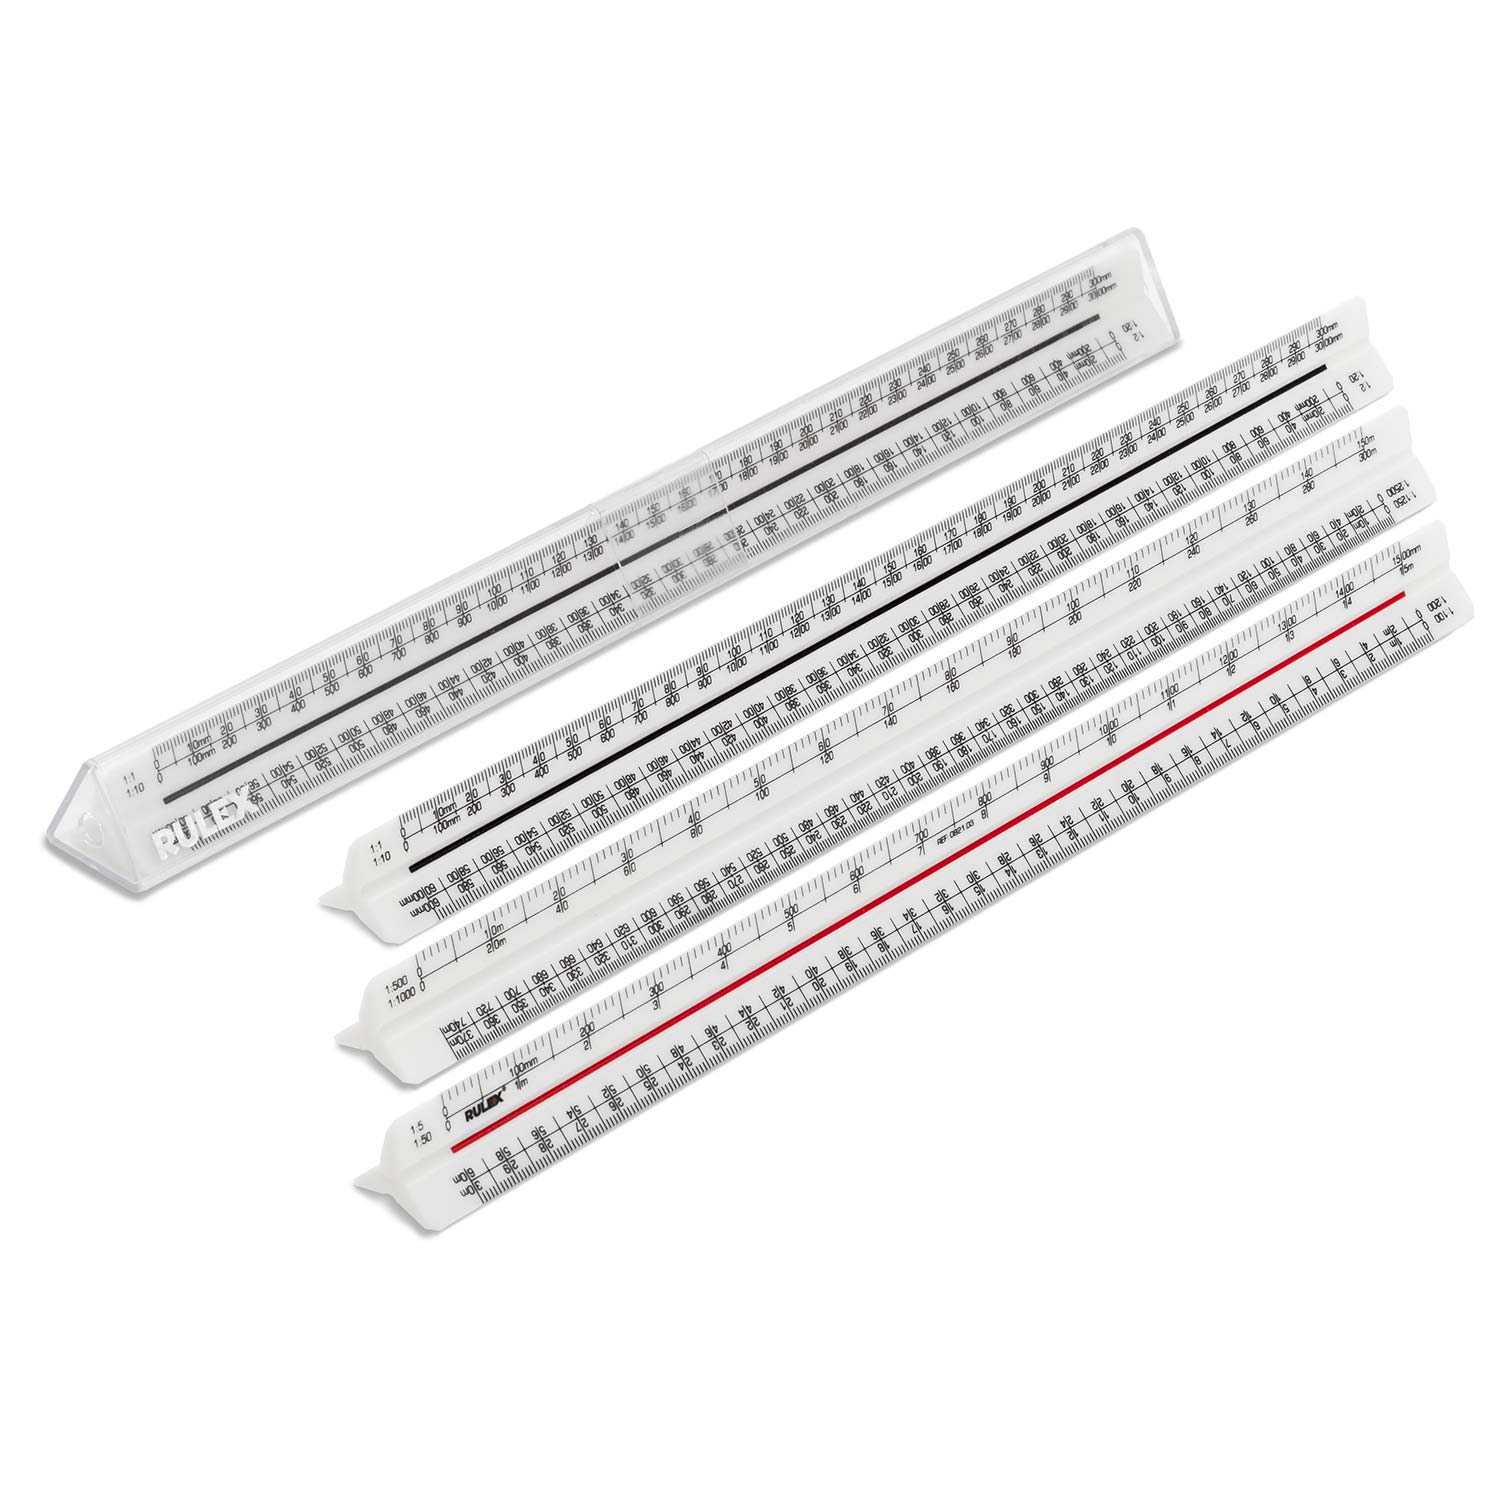 Utoolmart Plastic Triangular Big Scale Ruler 300mm Total Length Drafting  Measuring Tool for Engineering Design Architectural Drawing 1pcs :  : Office Products